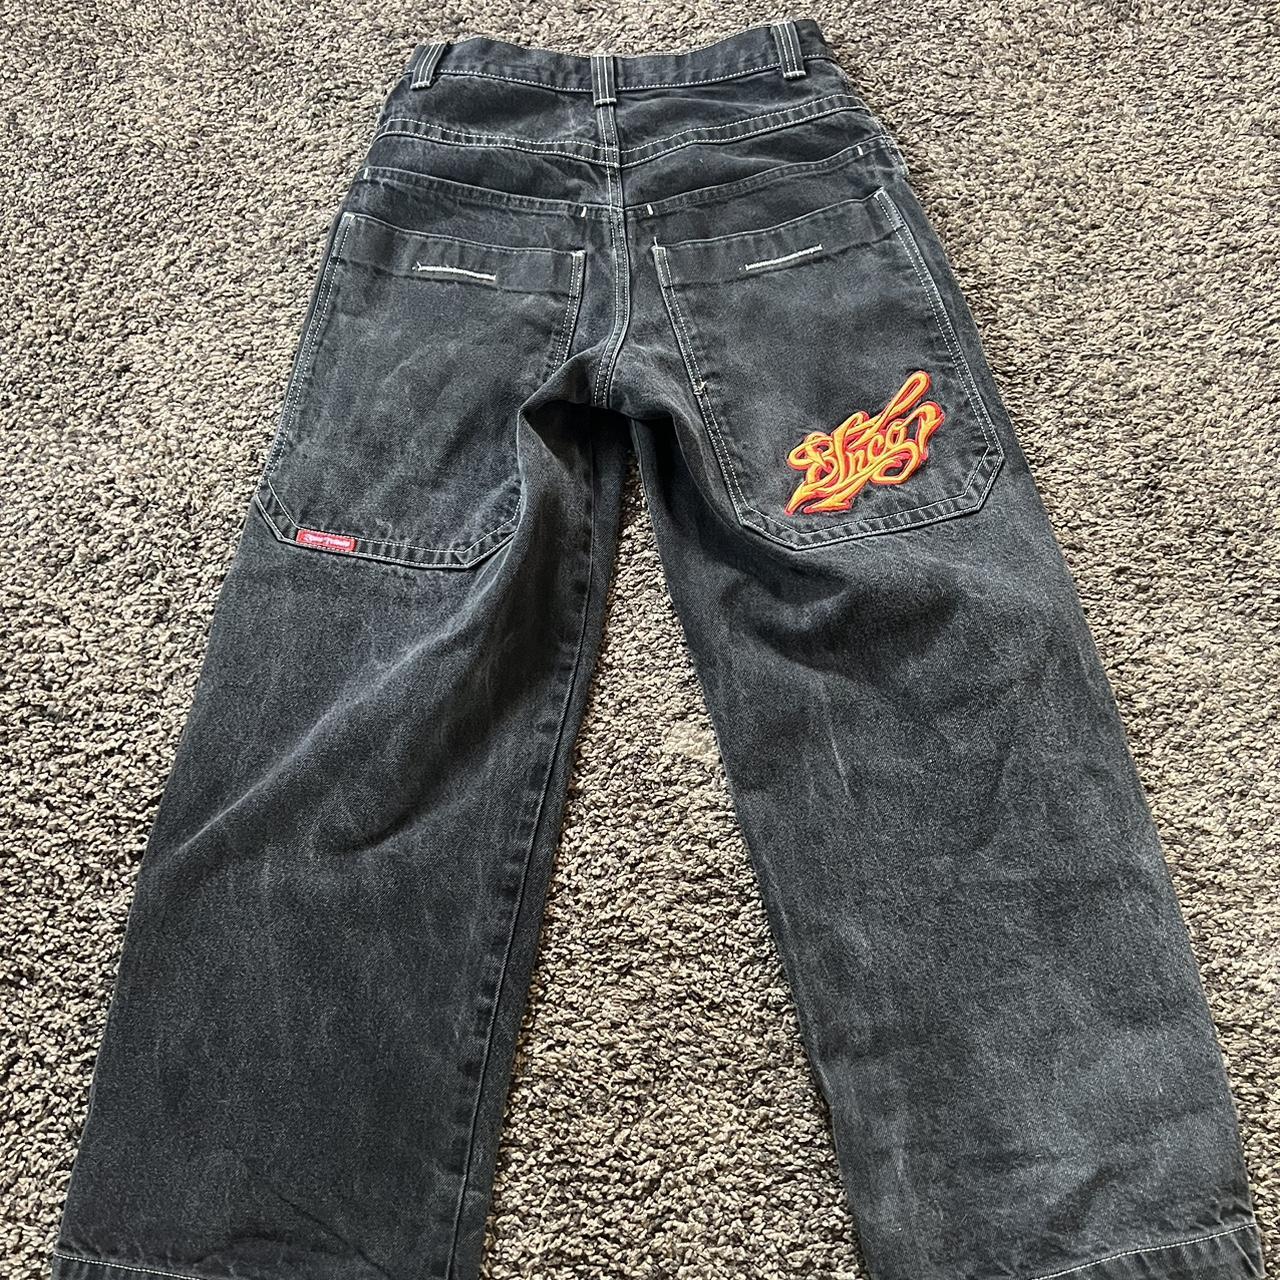 JNCO BLCK JEANS TRIBAL COLLECTION in very good... - Depop